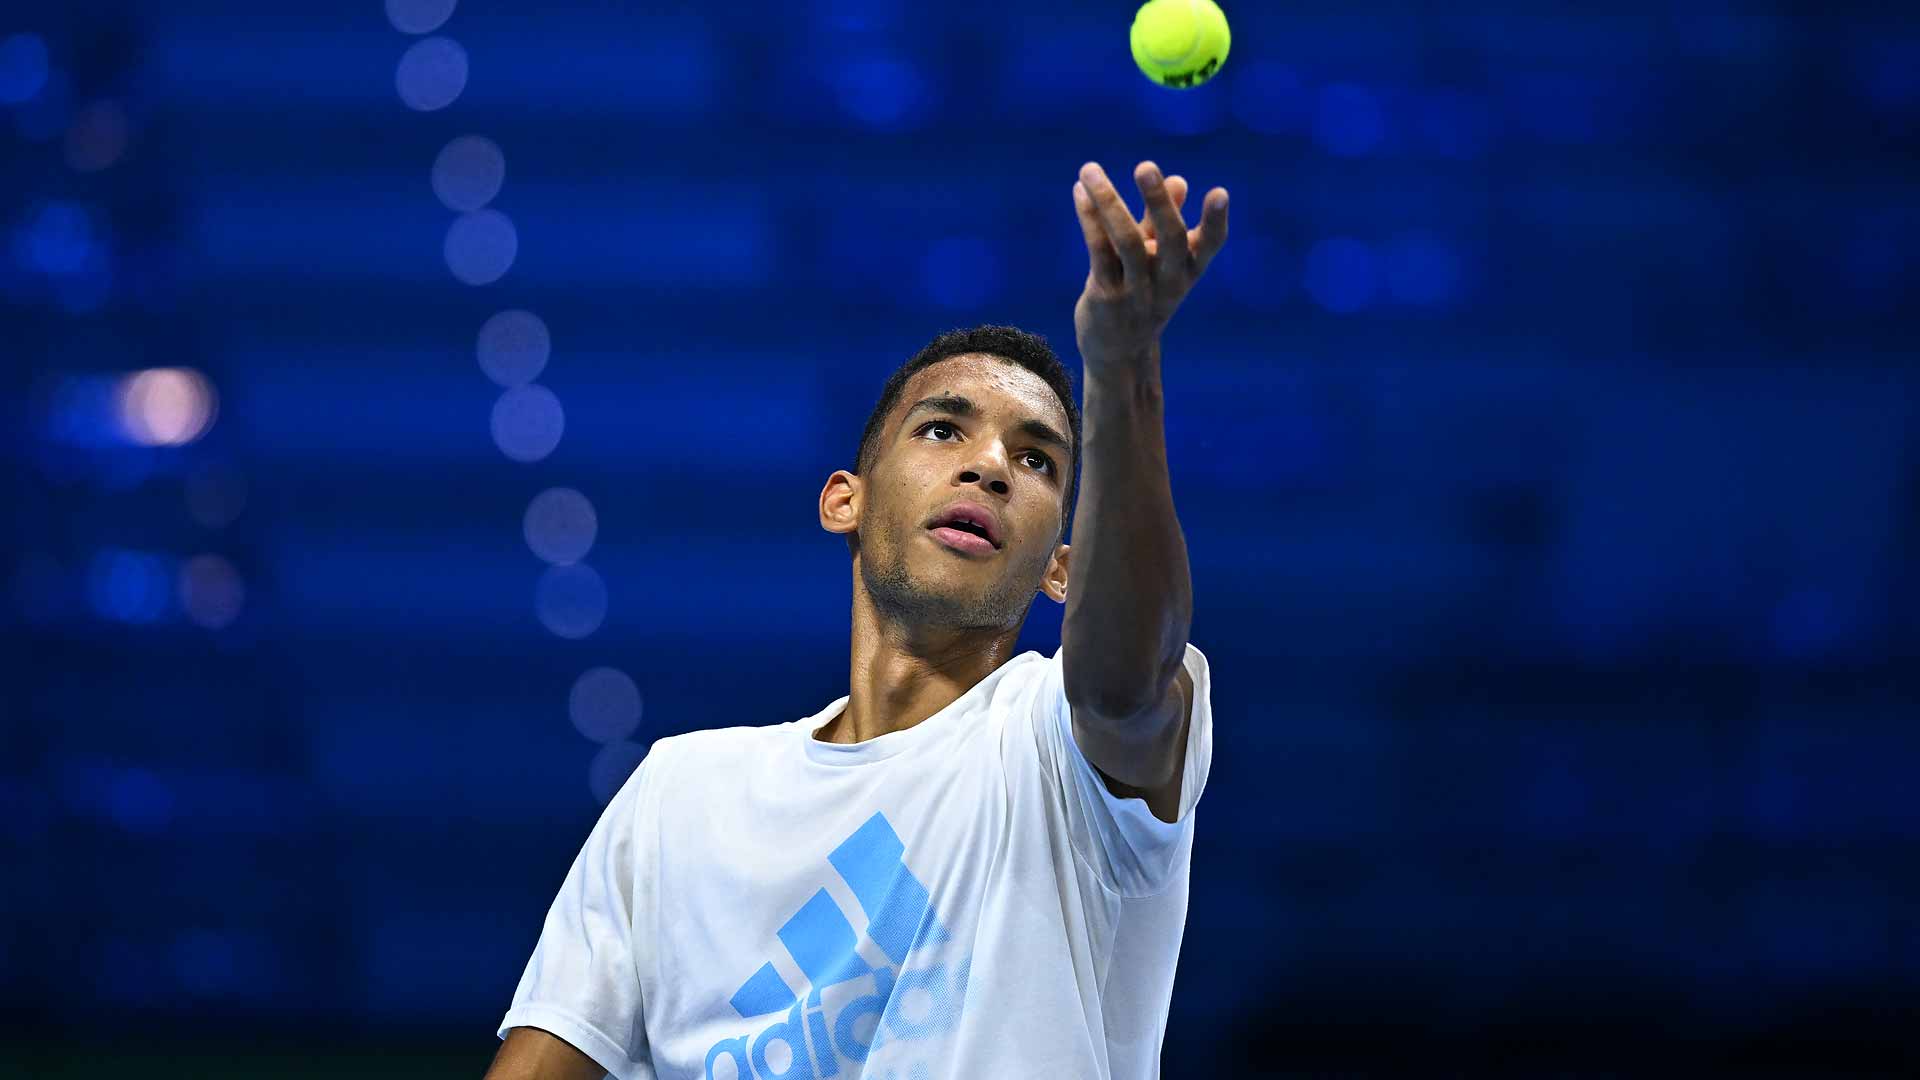 Felix Auger-Aliassime is in Green Group along with Rafael Nadal, Casper Ruud and Taylor Fritz.